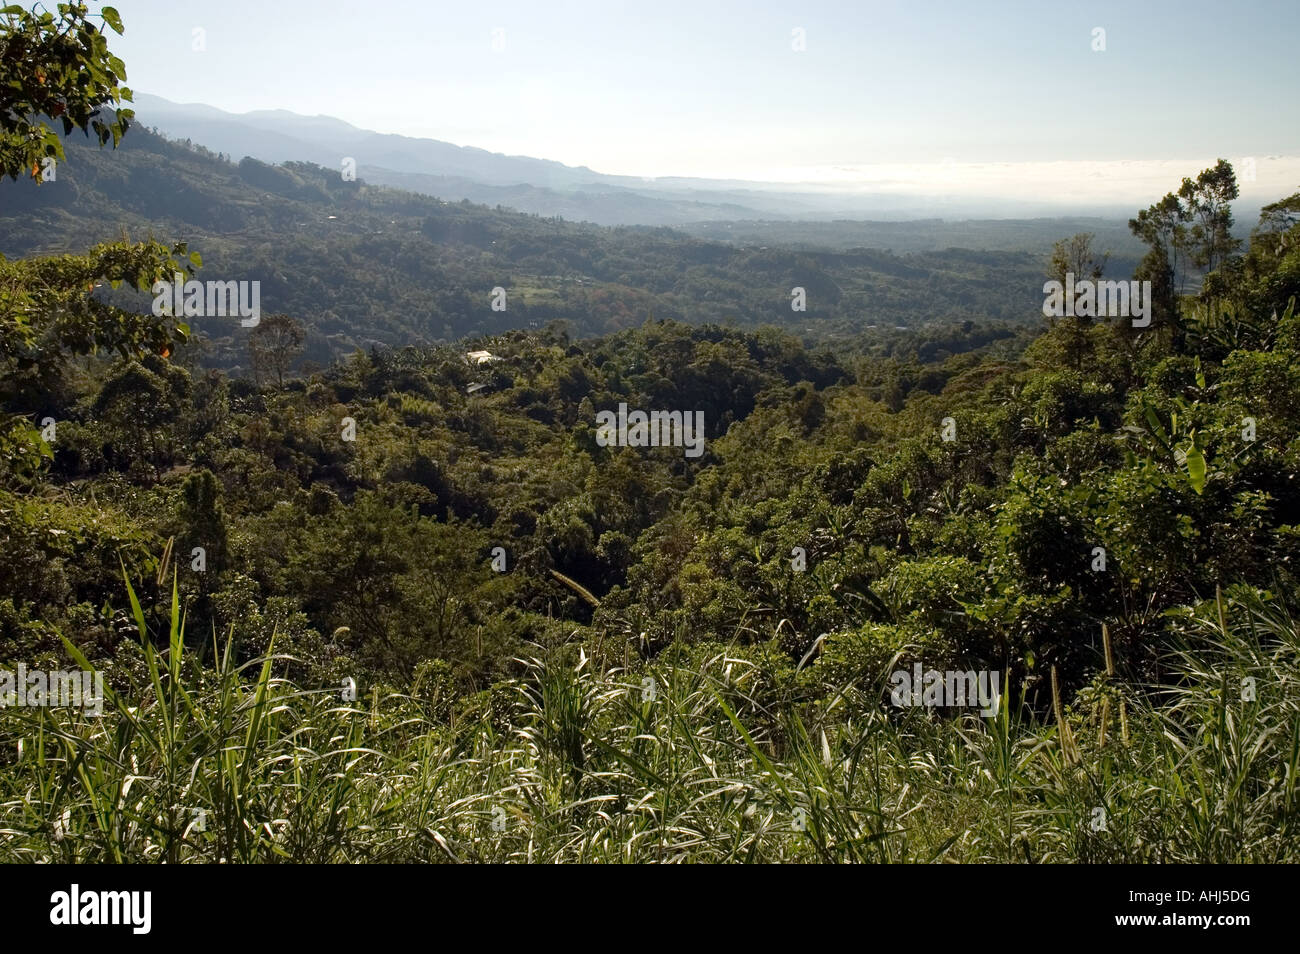 Forested landscape with small farms, Osa Peninsula, Costa Rica Stock Photo